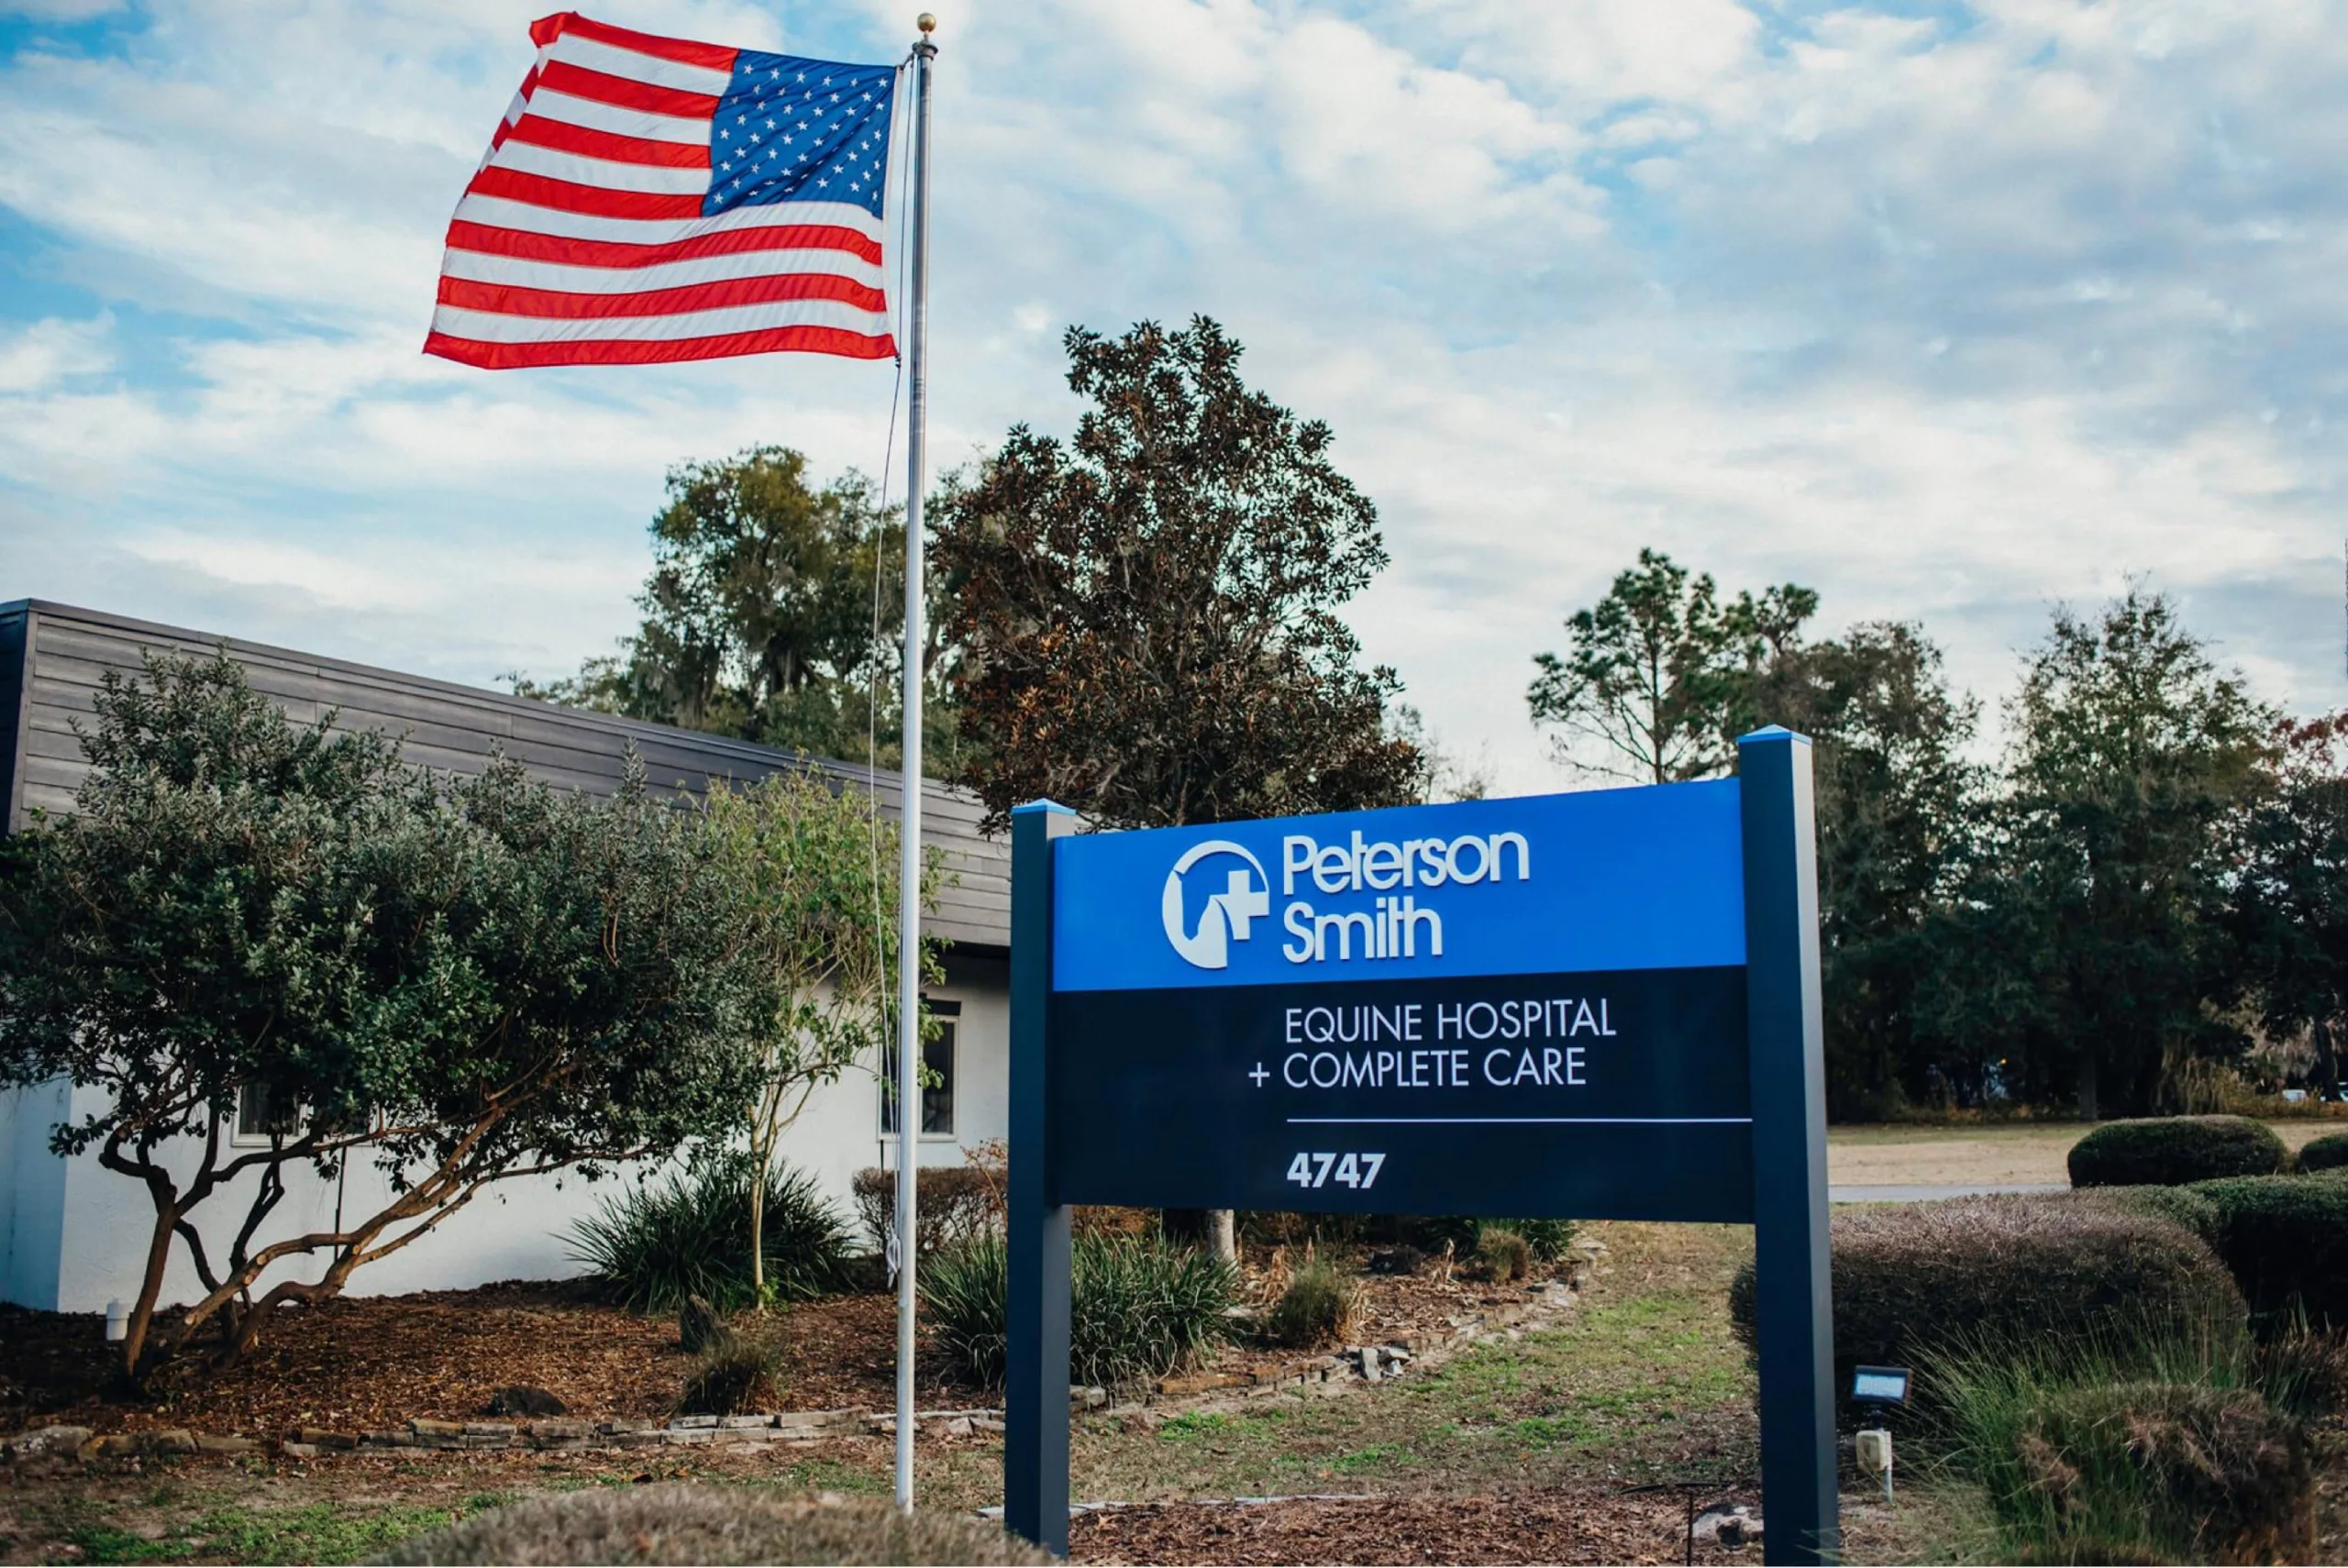 peterson smith signage